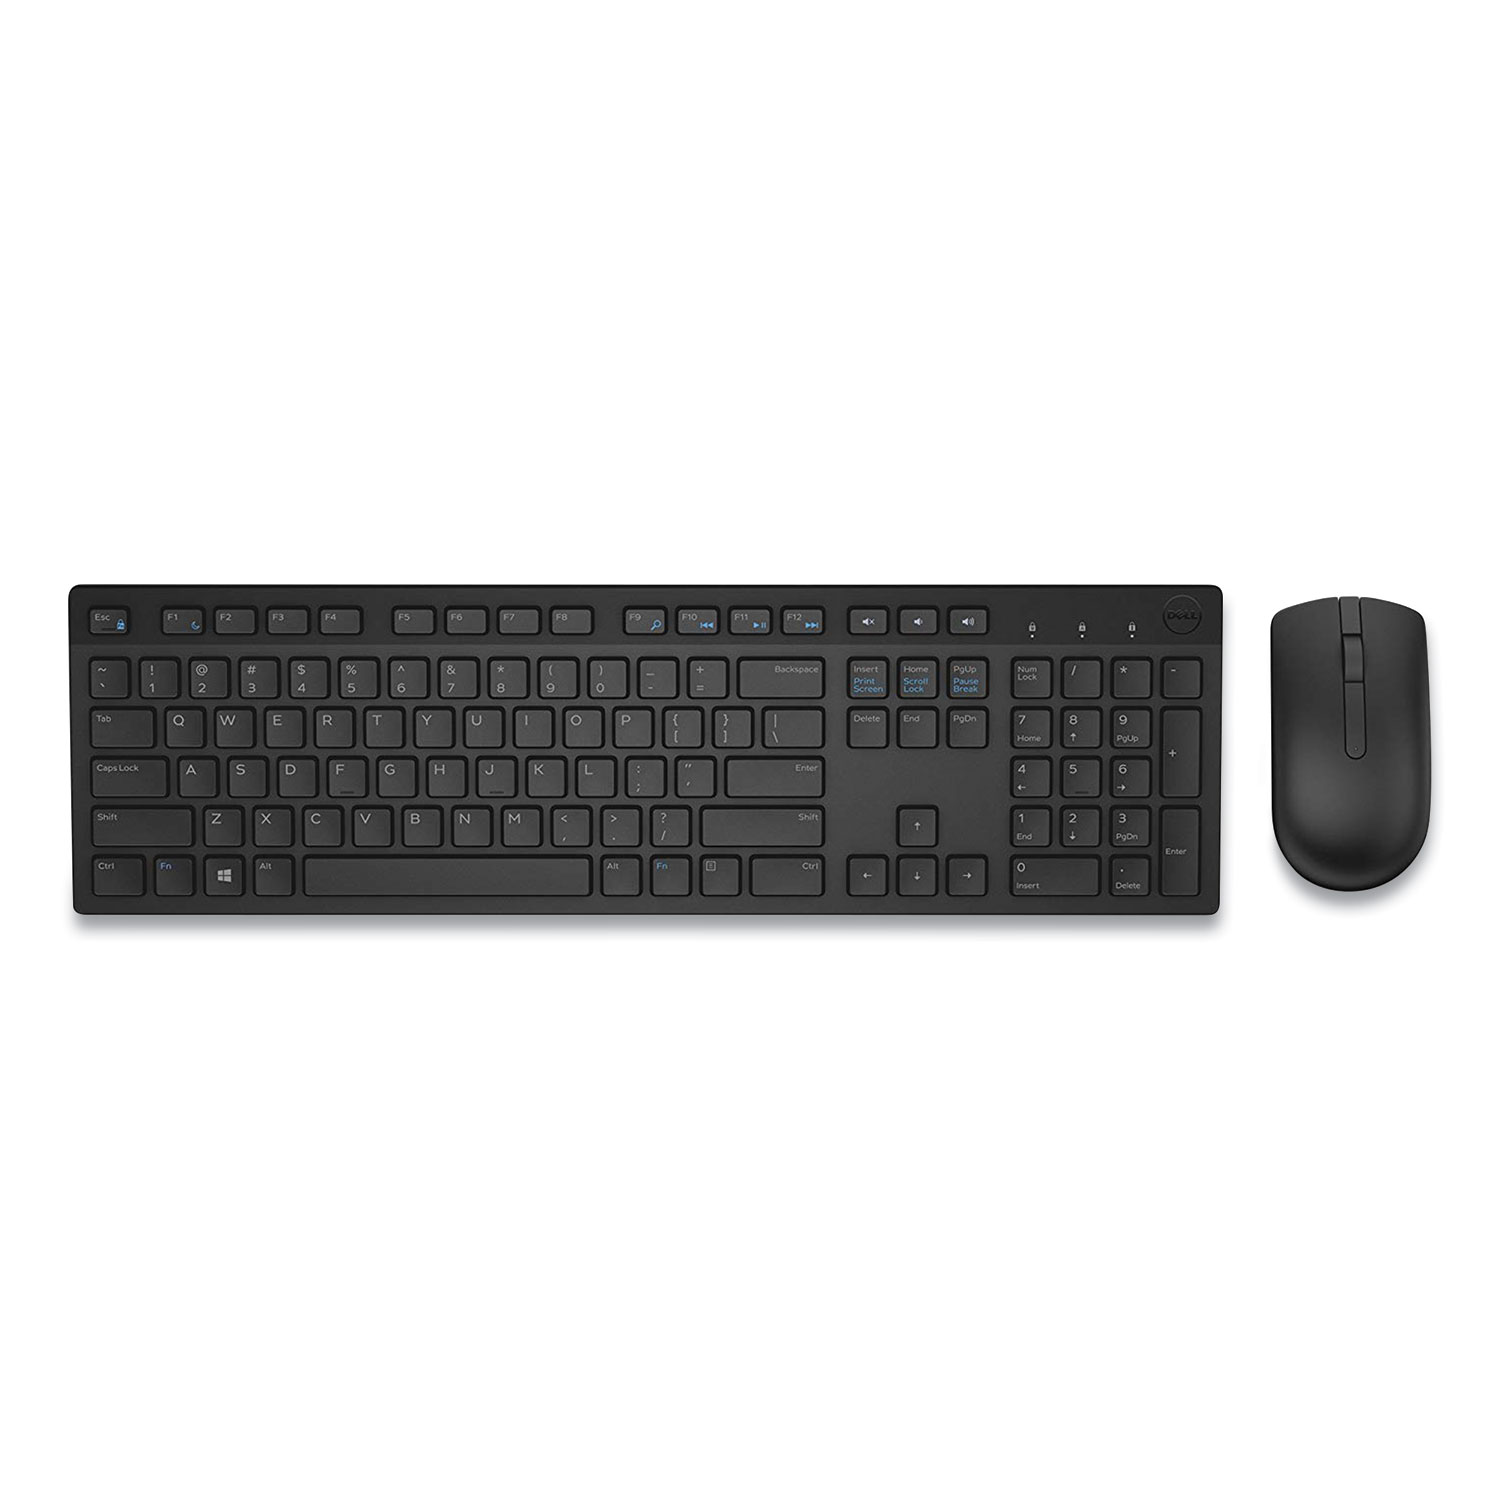  Dell 14DFF KM636 Wireless Keyboard and Mouse Combo, 2.4 GHz Frequency, Black (DLL2140515) 